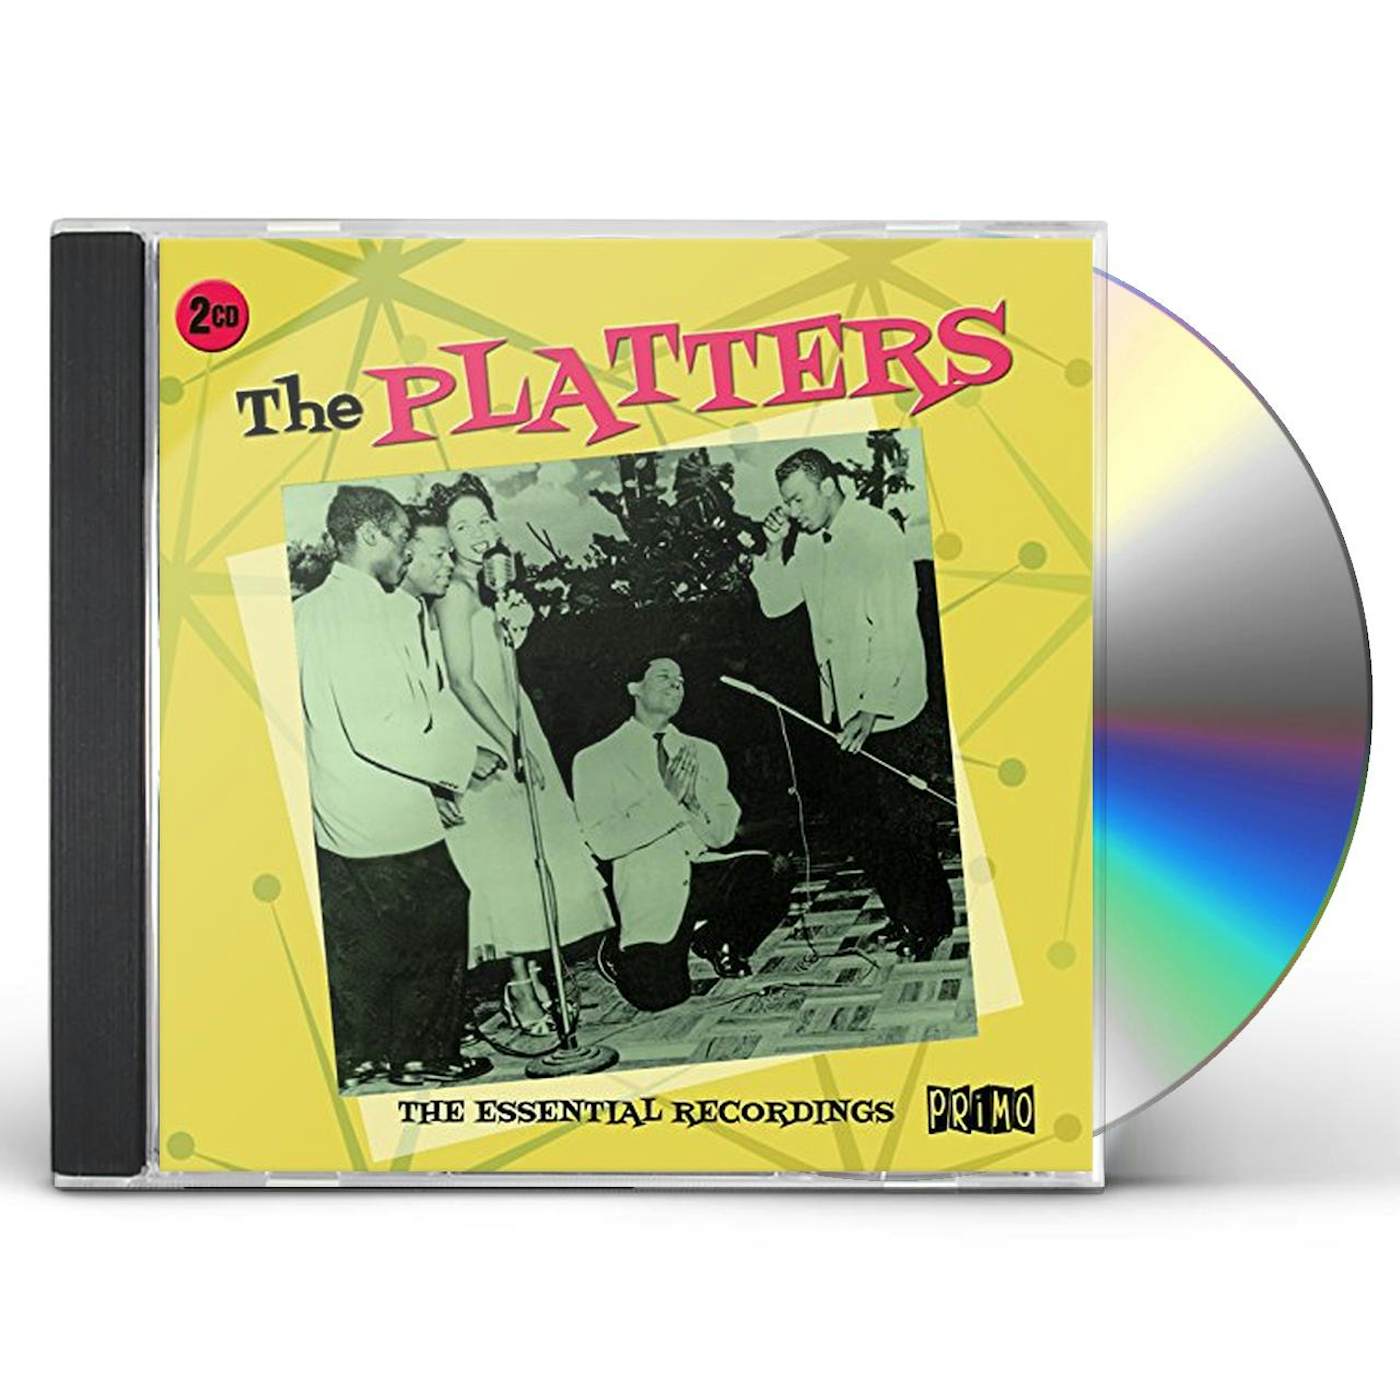 The Platters ESSENTIAL RECORDINGS CD